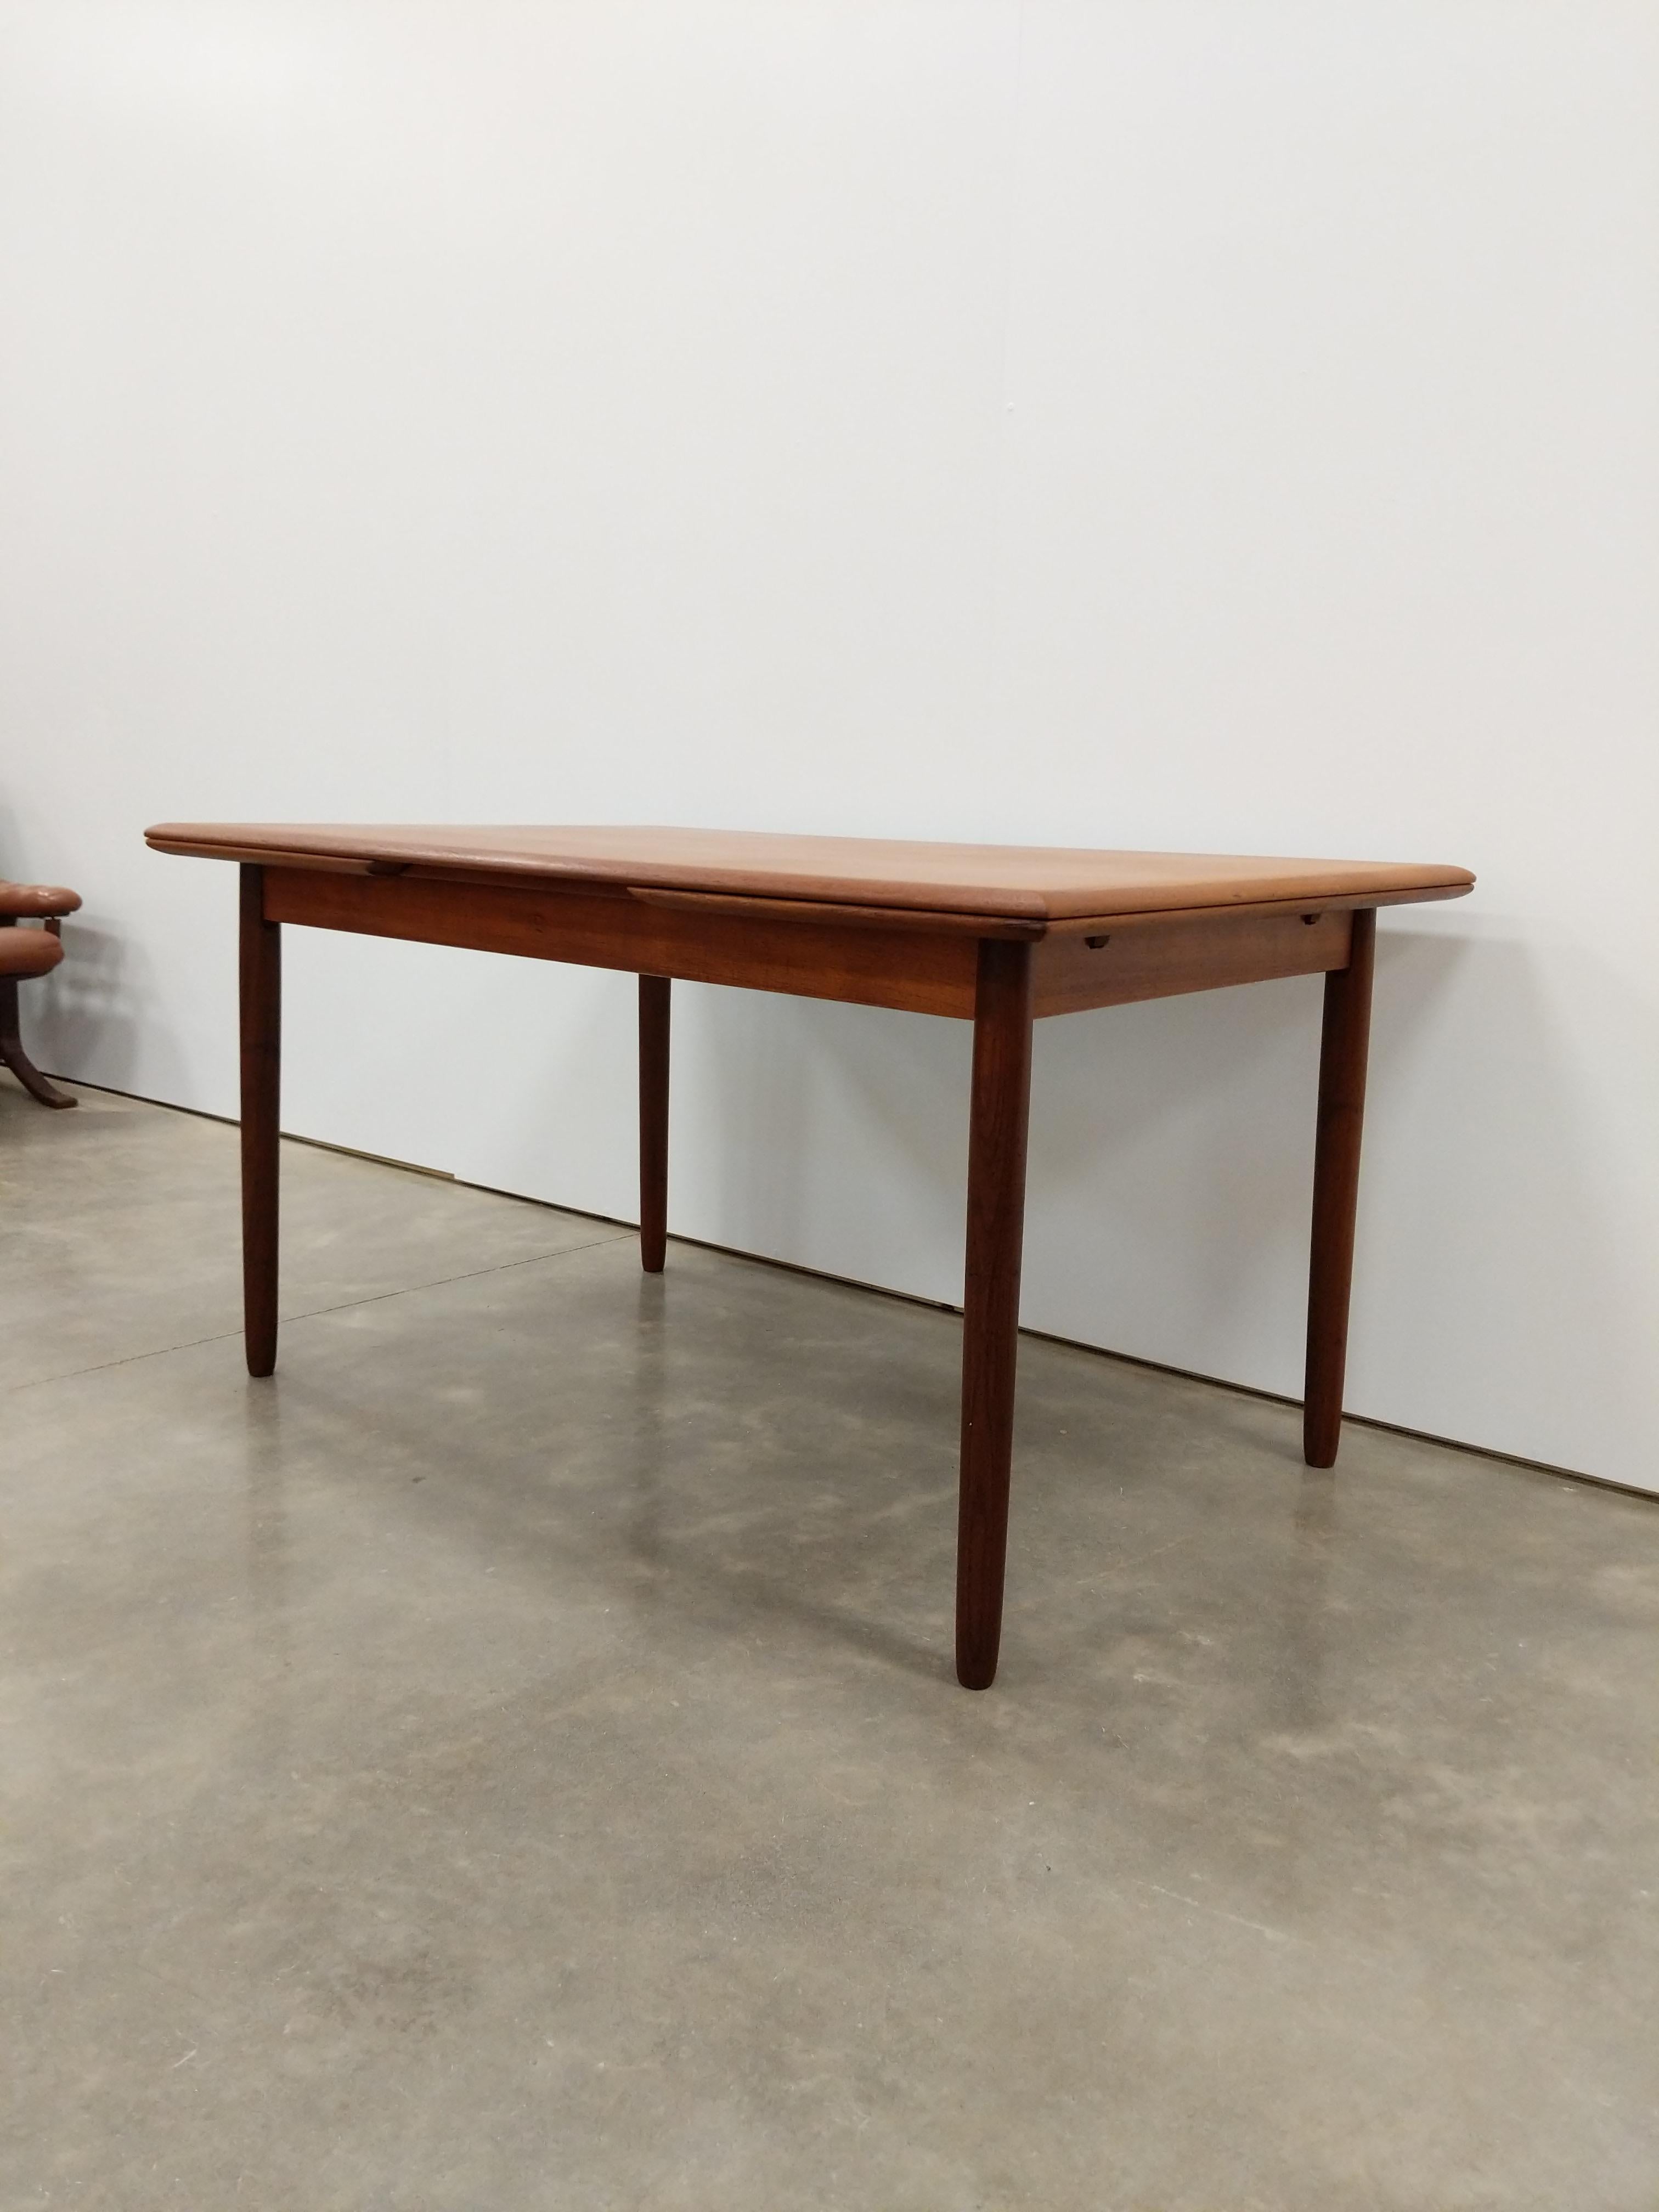 Authentic vintage mid century Danish / Scandinavian Modern teak extendable dining table with 2 built-in Dutch-style draw leaves.

This piece is in excellent refinished condition with very few signs of age-related wear (see photos).

If you would